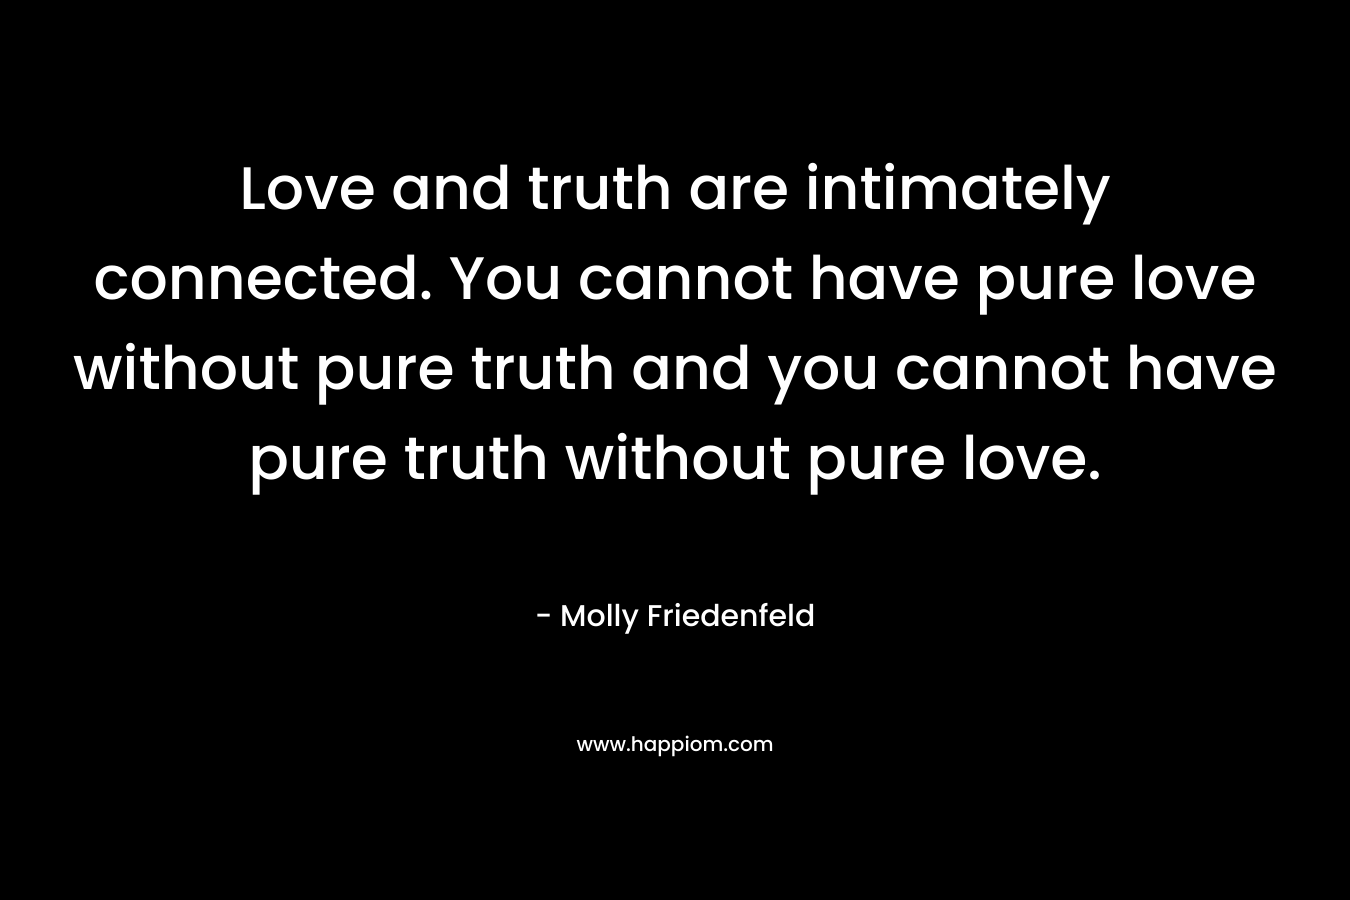 Love and truth are intimately connected. You cannot have pure love without pure truth and you cannot have pure truth without pure love.